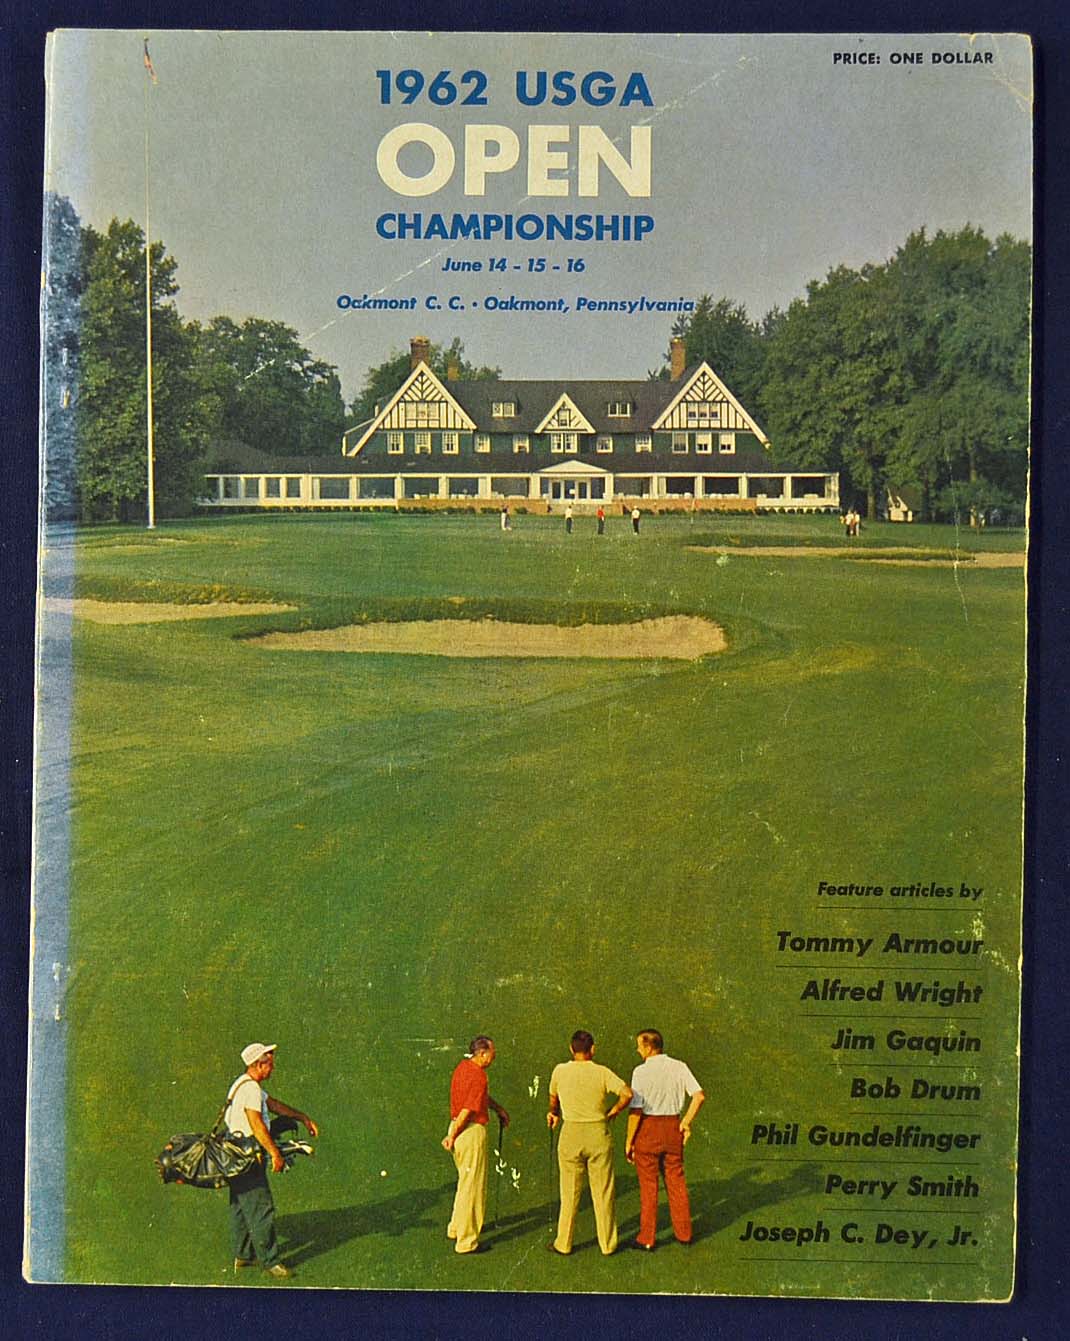 1962 official US 62nd Open Golf Championship programme played at Oakmont Country Club - won by